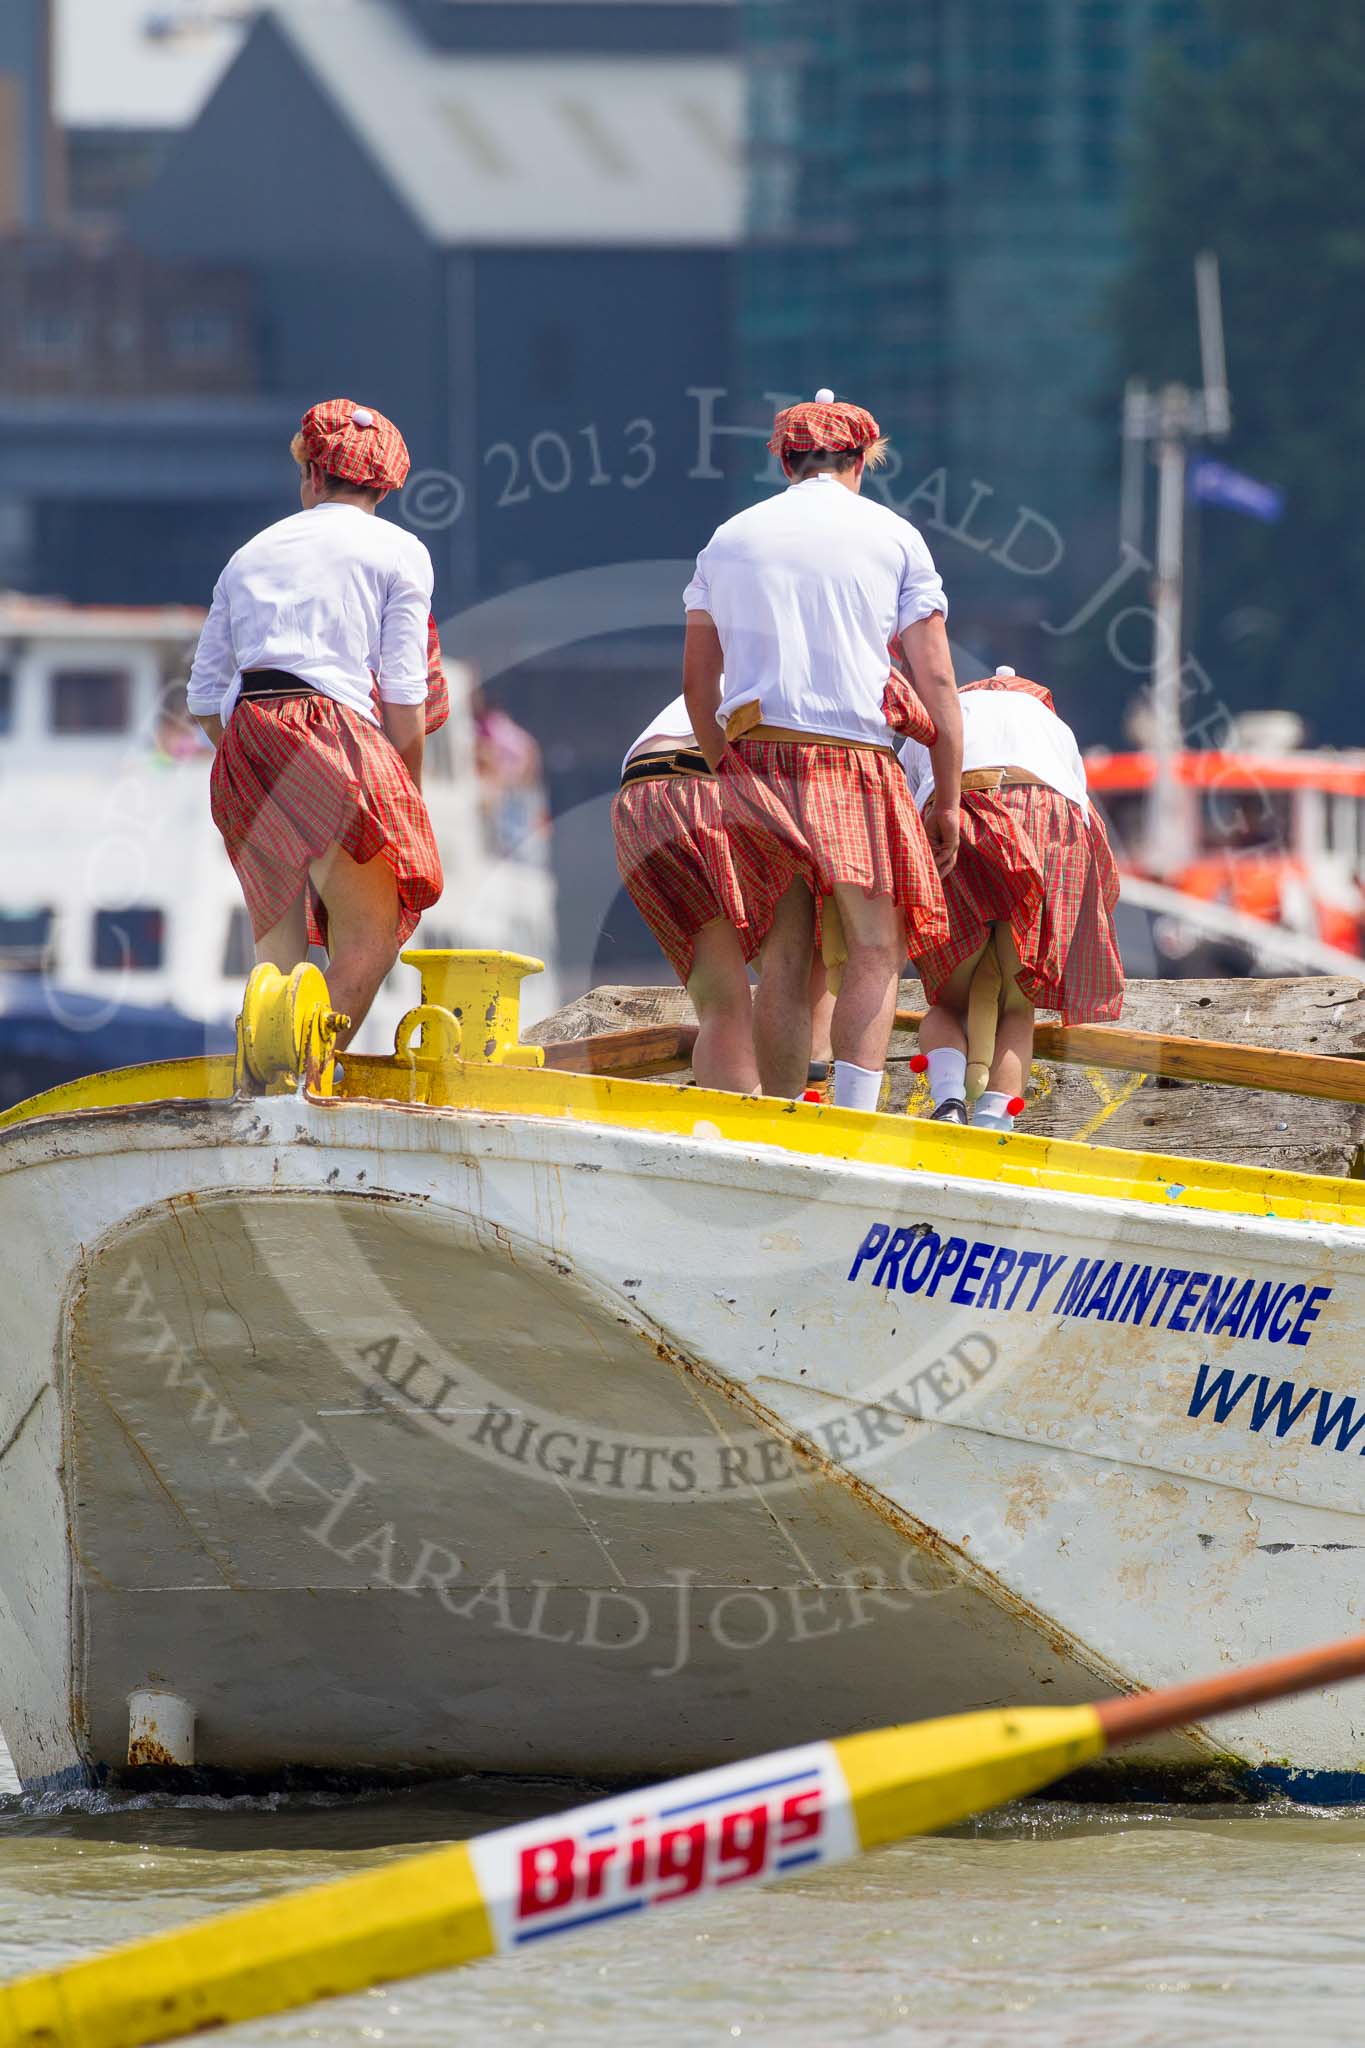 TOW River Thames Barge Driving Race 2013: Rowers wearing skirts on the deck of of barge "Hoppy" by GPS Fabrication..
River Thames between Greenwich and Westminster,
London,

United Kingdom,
on 13 July 2013 at 12:38, image #138